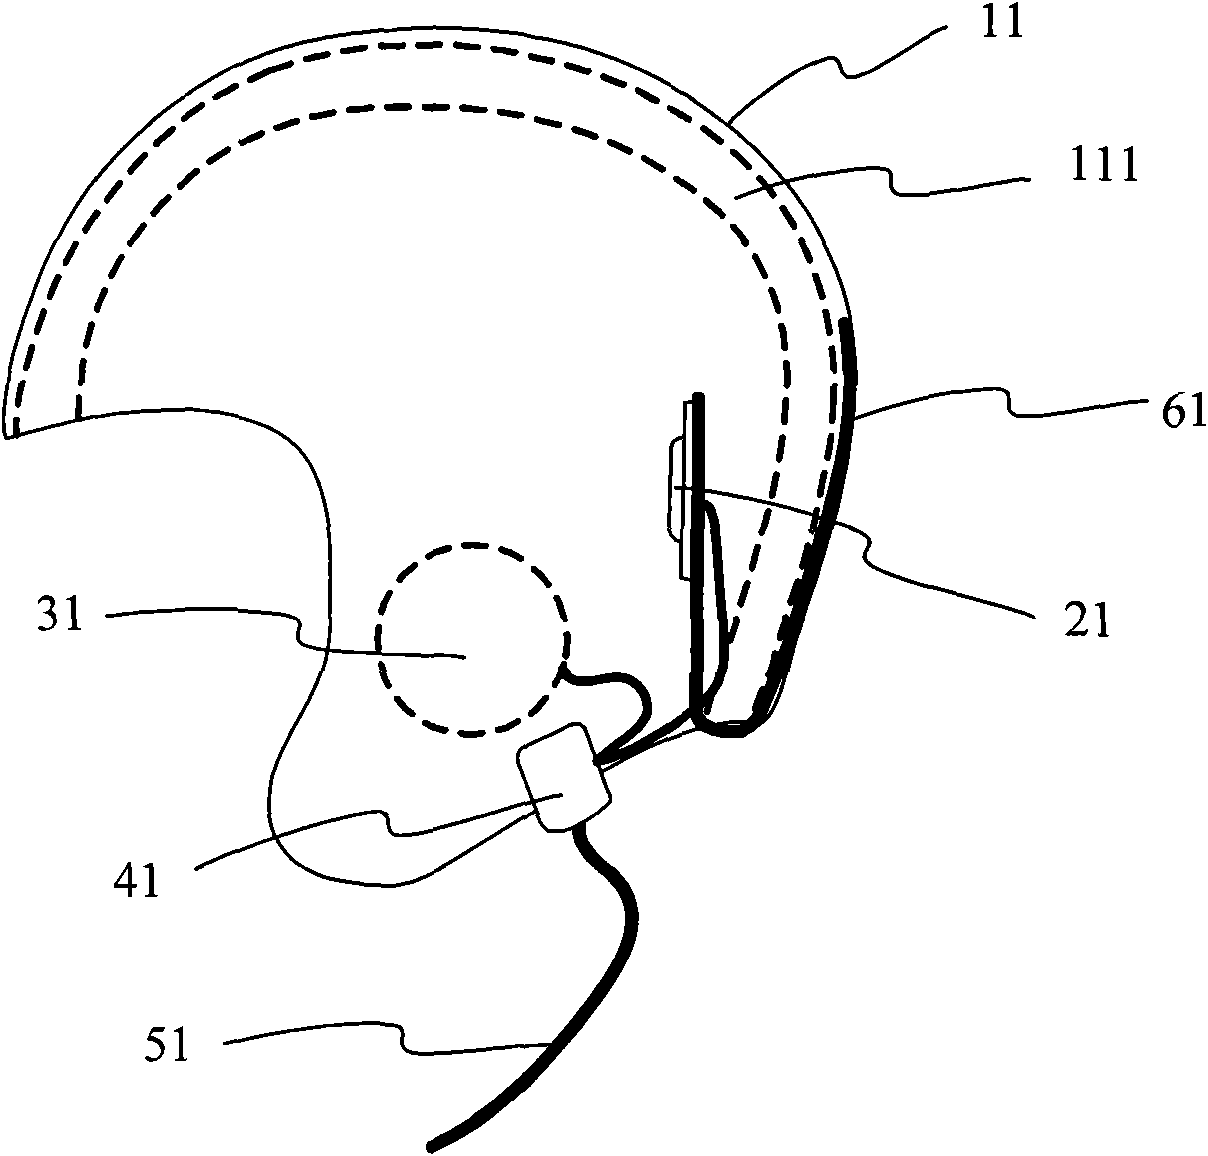 Head-mounted voice transceiver